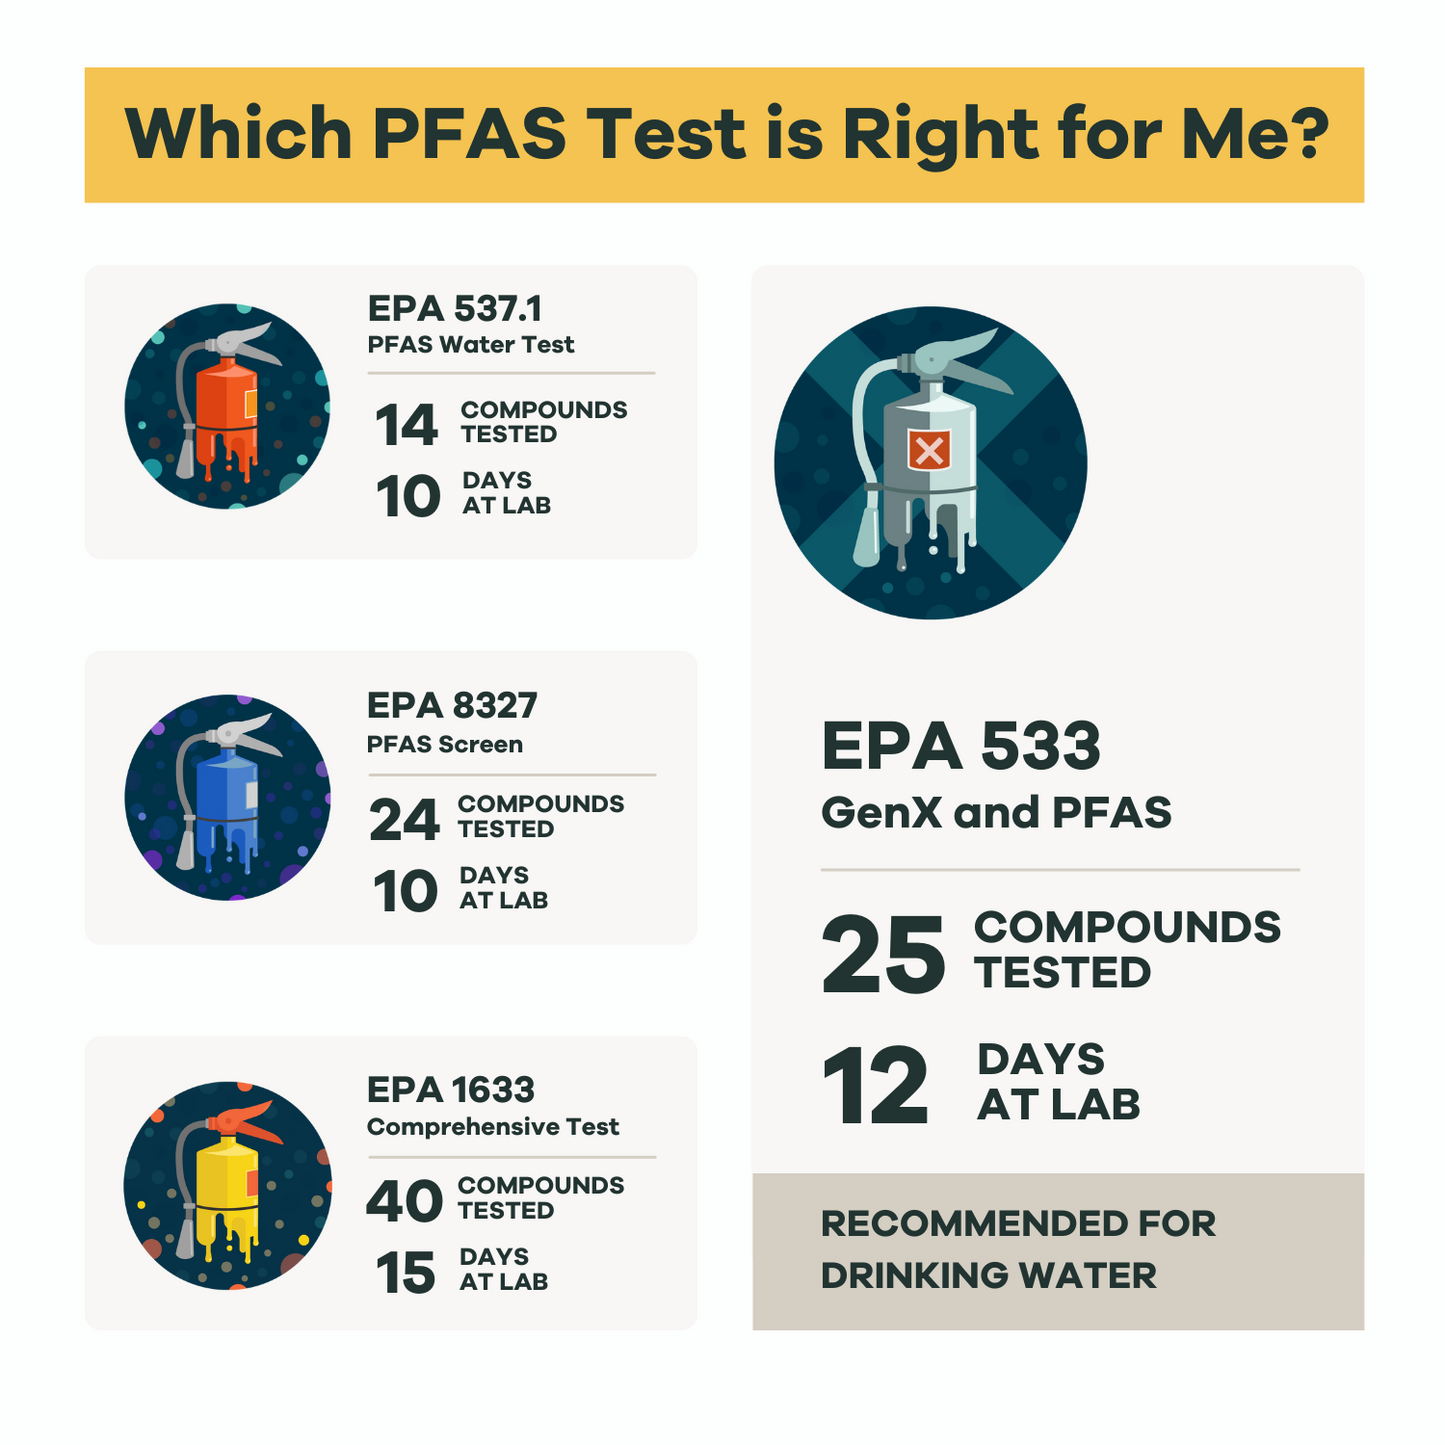 PFAS Testing for Drinking Water Overview